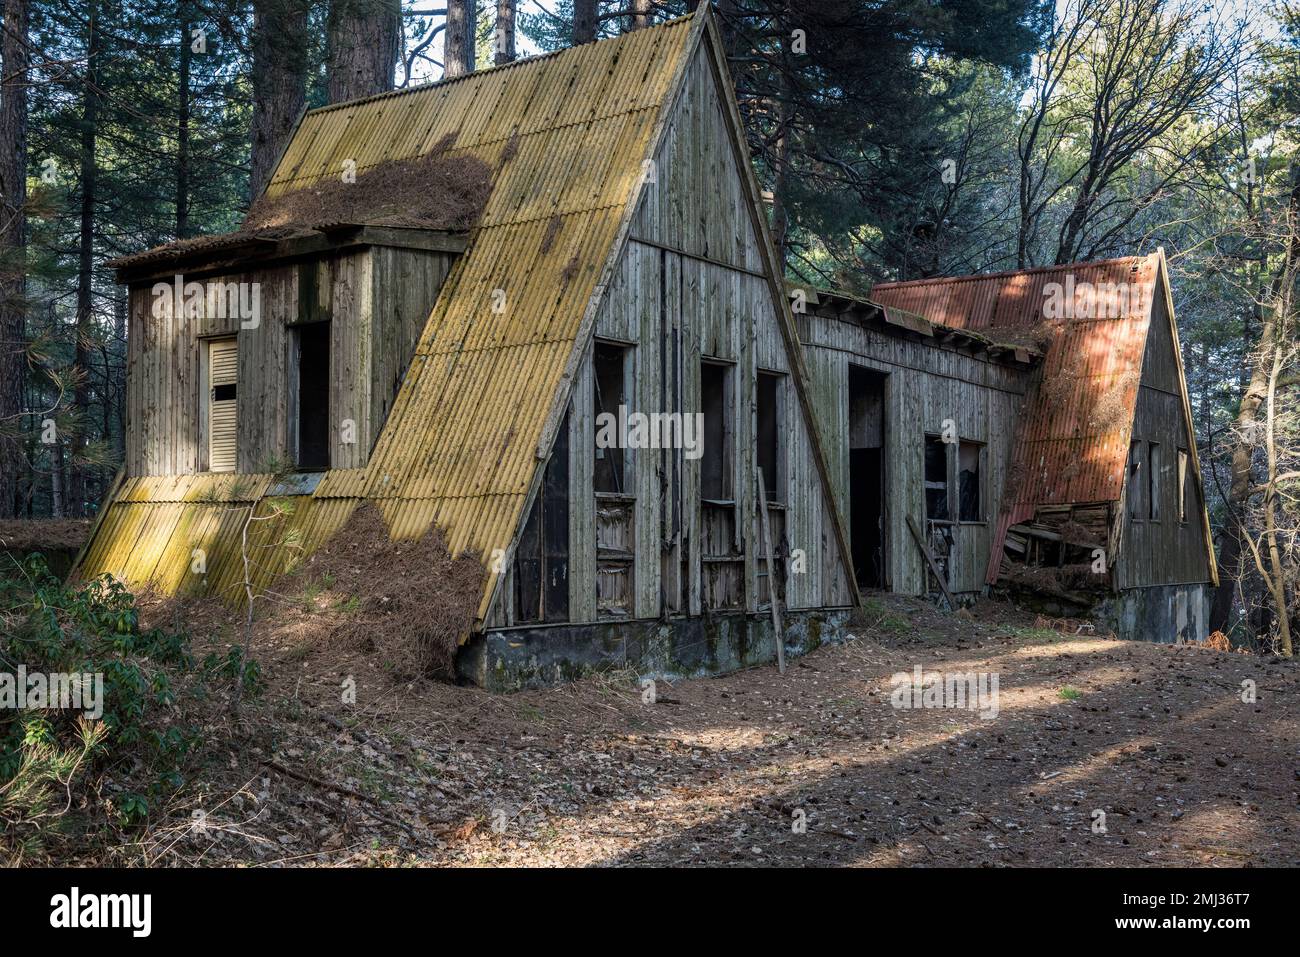 An empty and derelict hut in an old abandoned ski resort in the woods on Mount Etna, Sicily, Italy Stock Photo